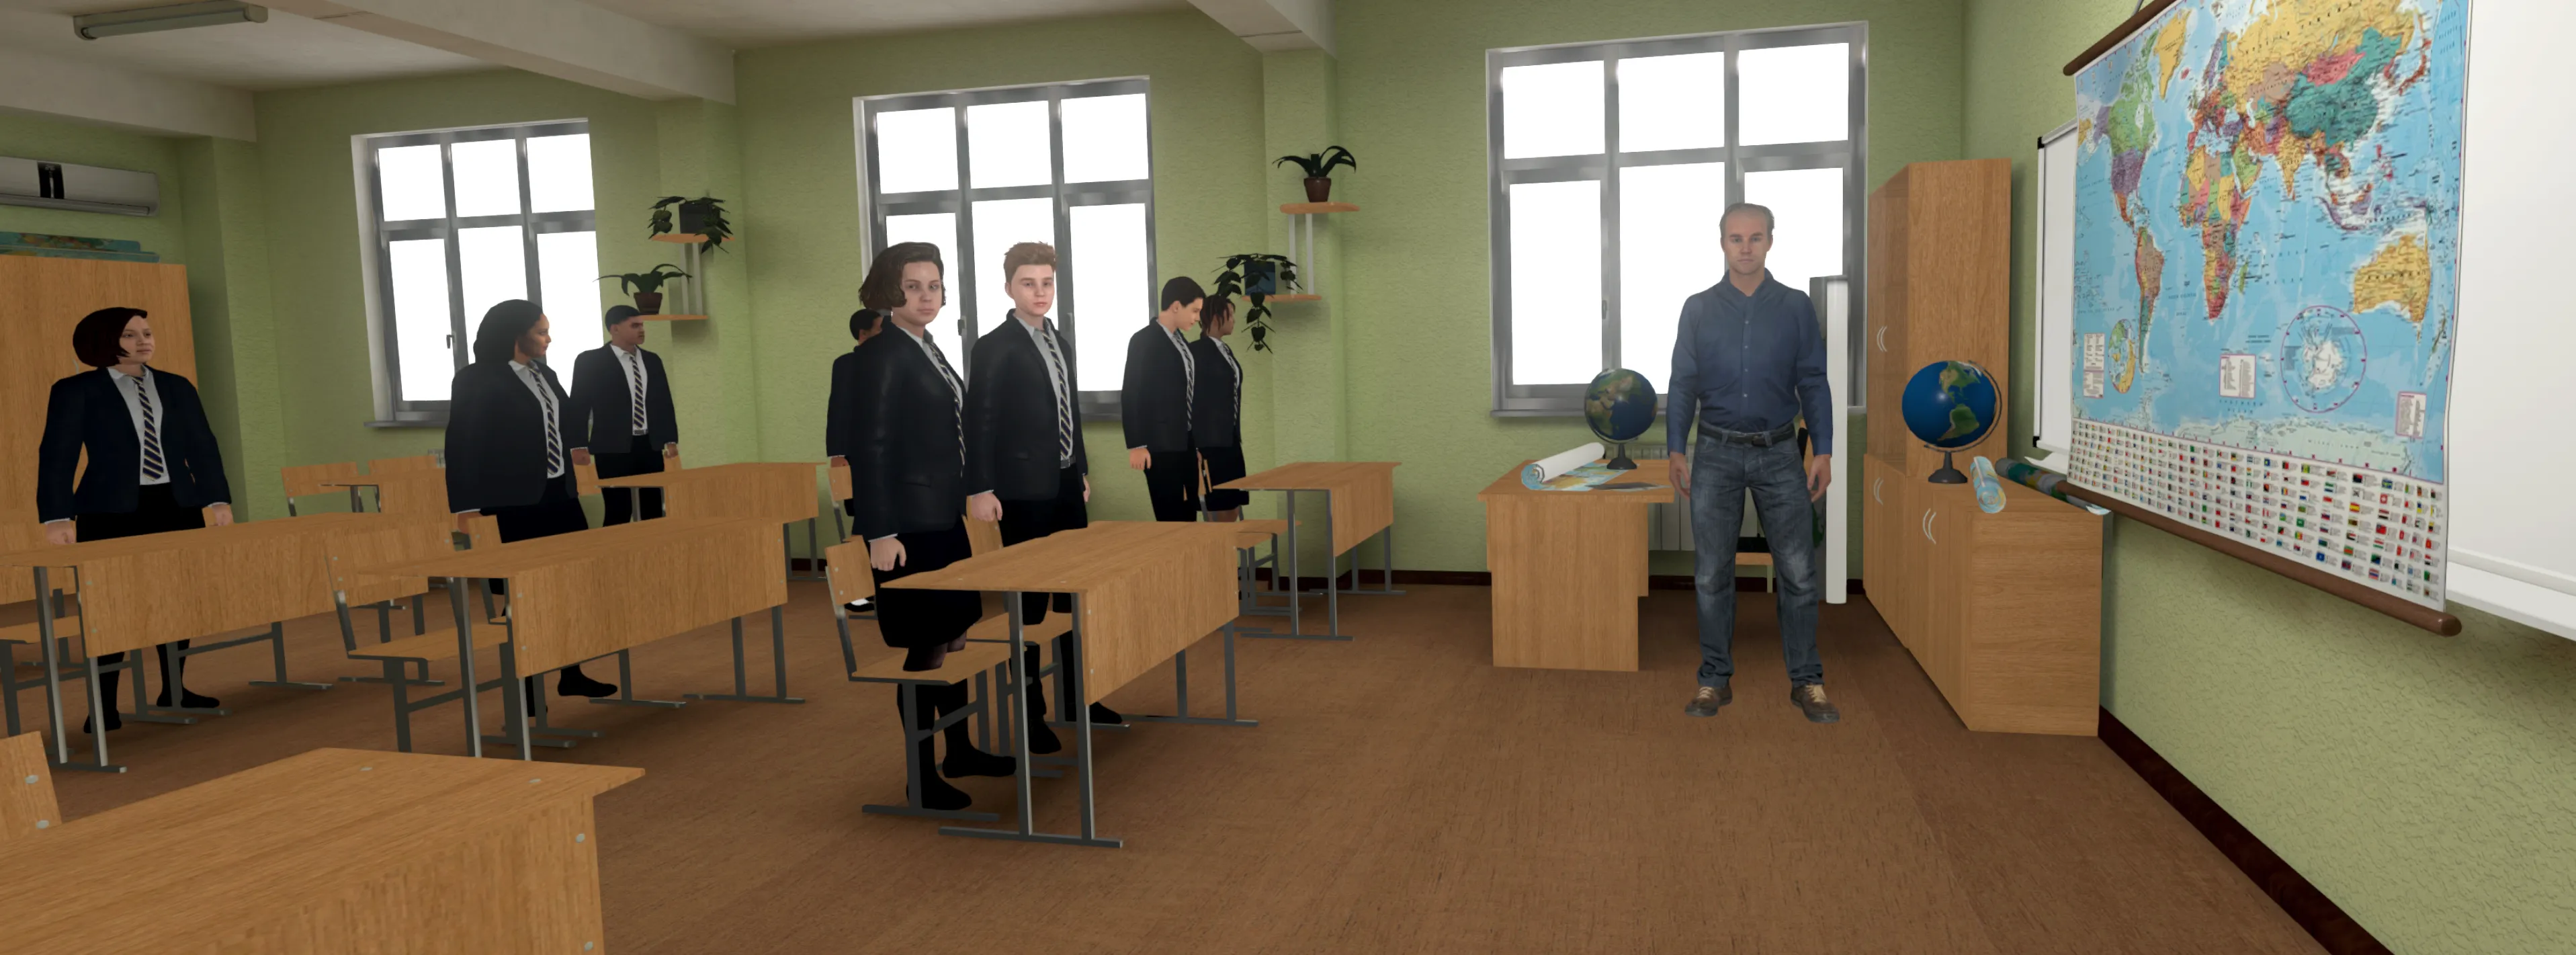 One of the VR CBT scenarios includes arriving to class with teacher and students all staring at you